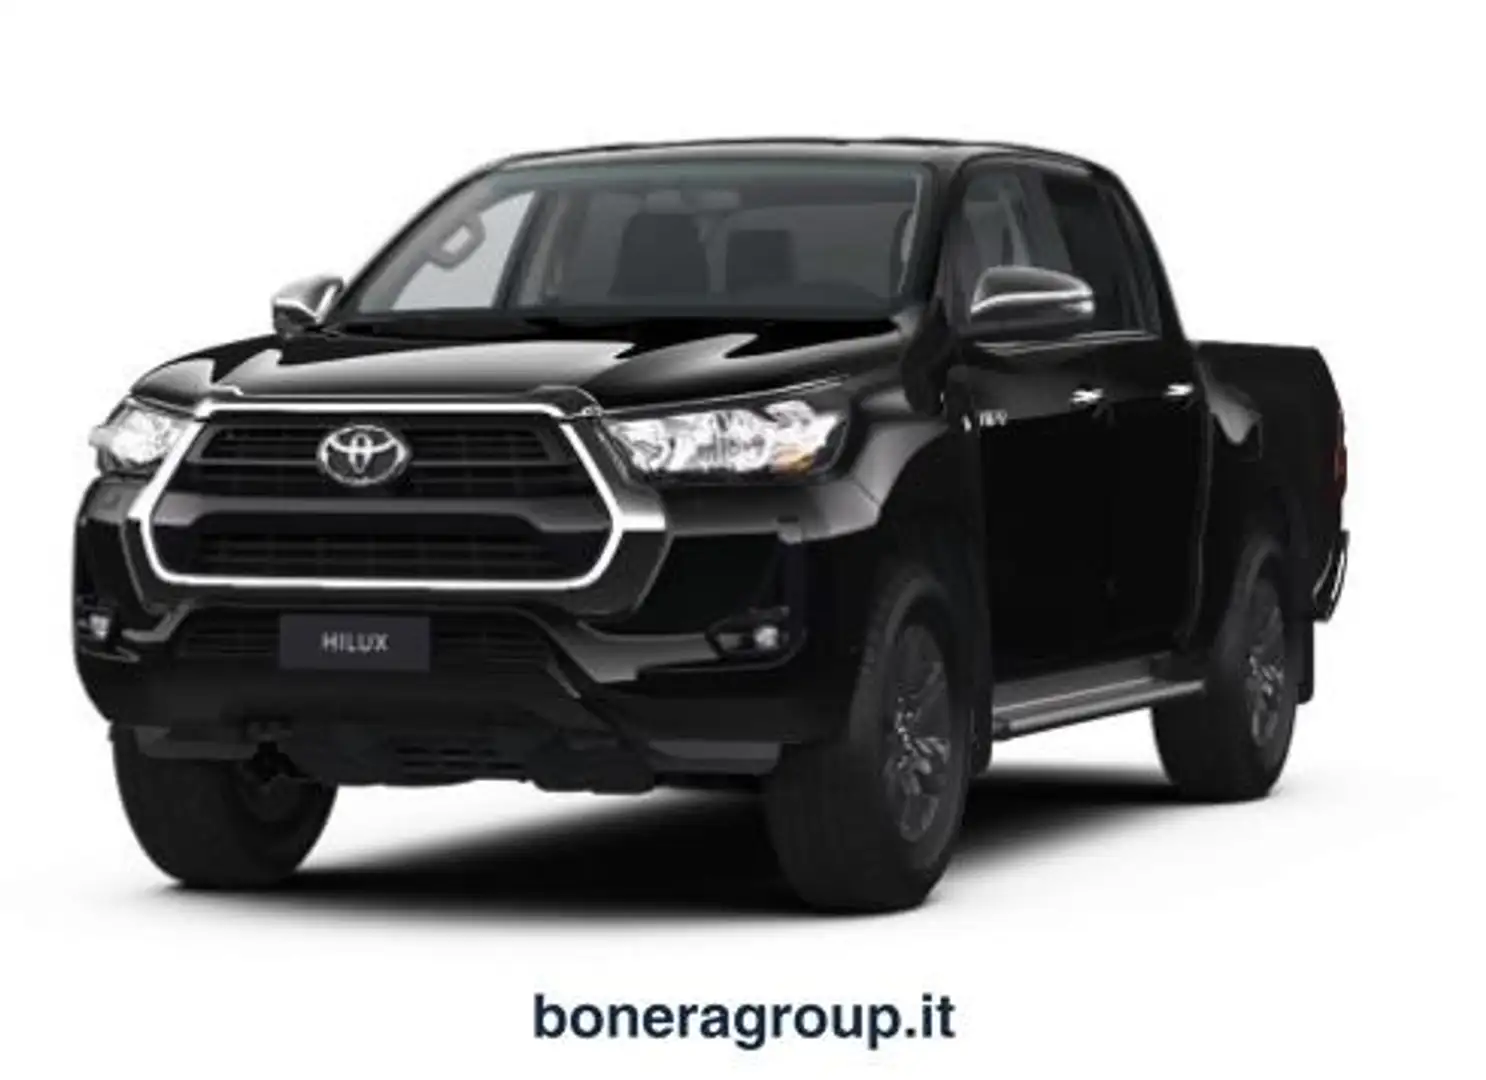 Toyota Hilux 2.4 d-4d double cab Lounge 4wd Siyah - 2